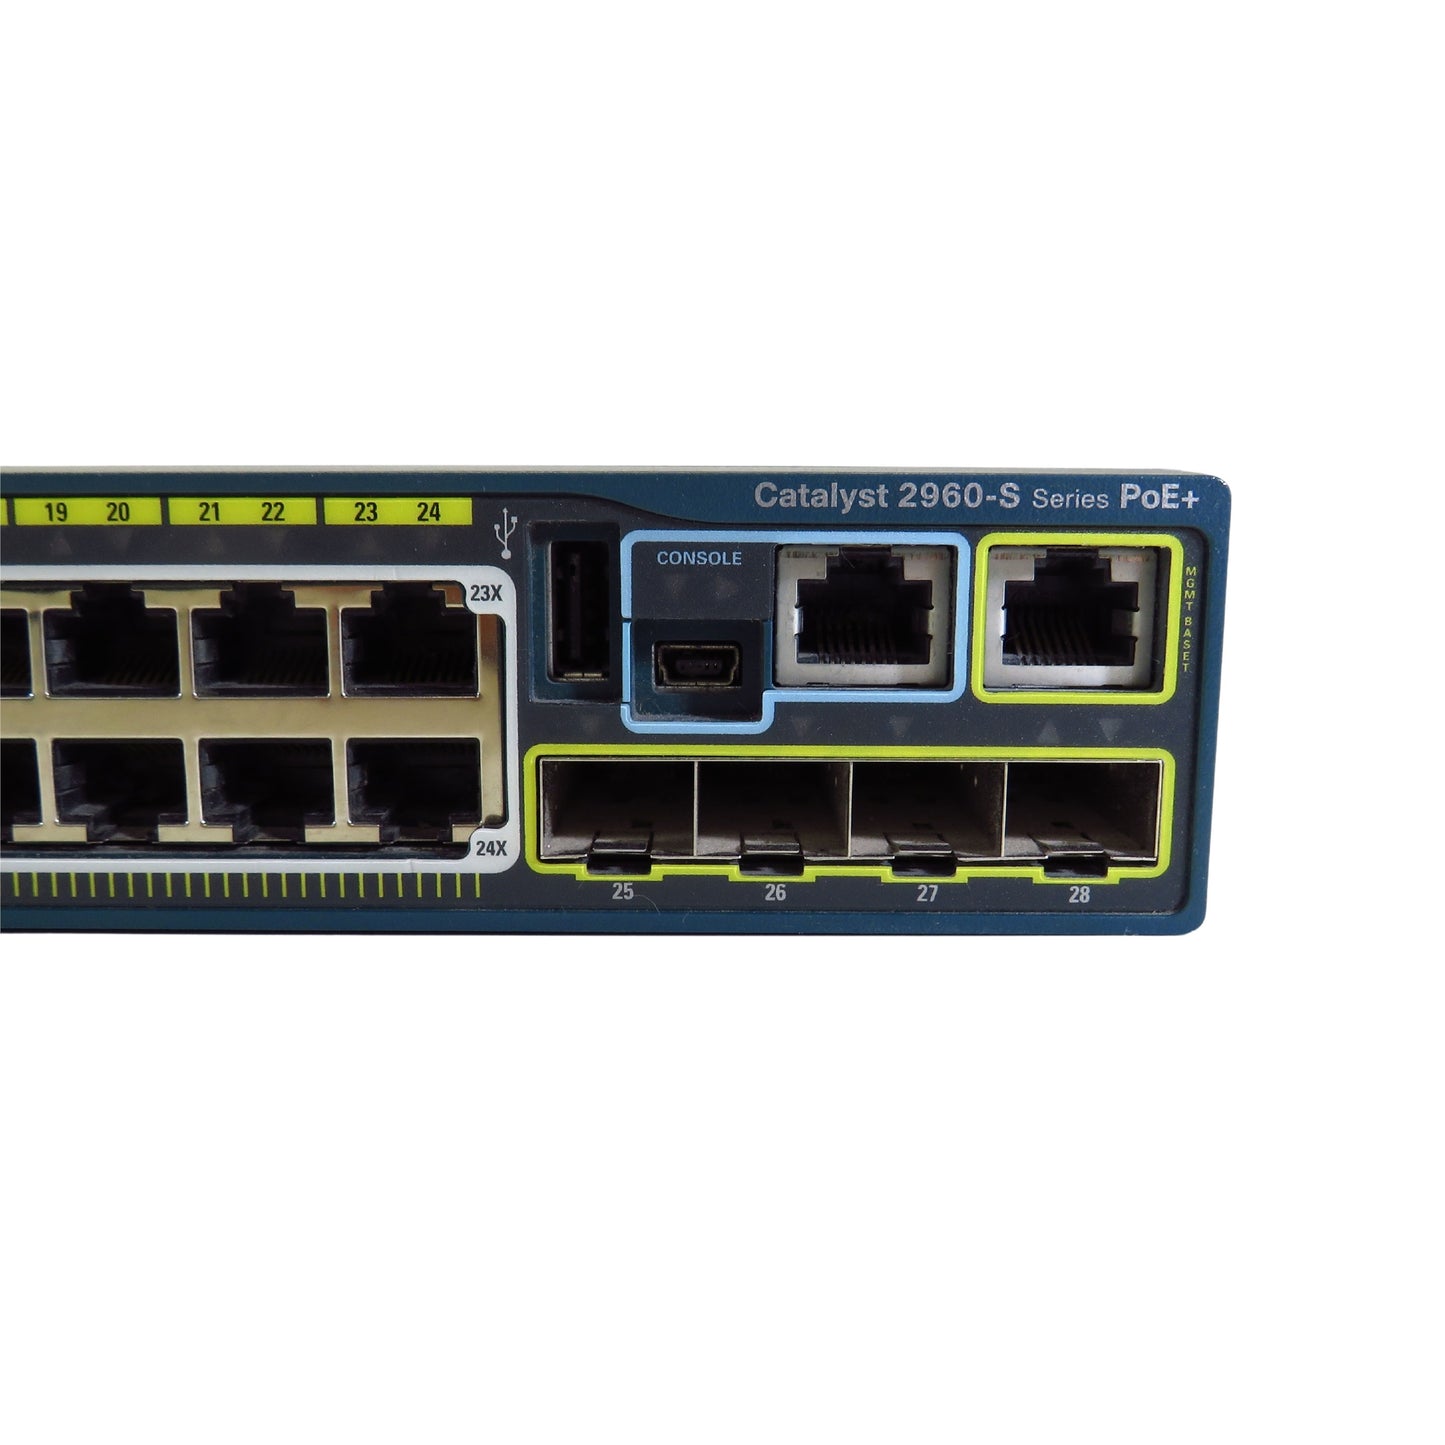 Cisco WS-C2960S-24PS-L Catalyst 2960-S PoE+ 24 Port 10/100/1000 1GbE Switch (Refurbished)